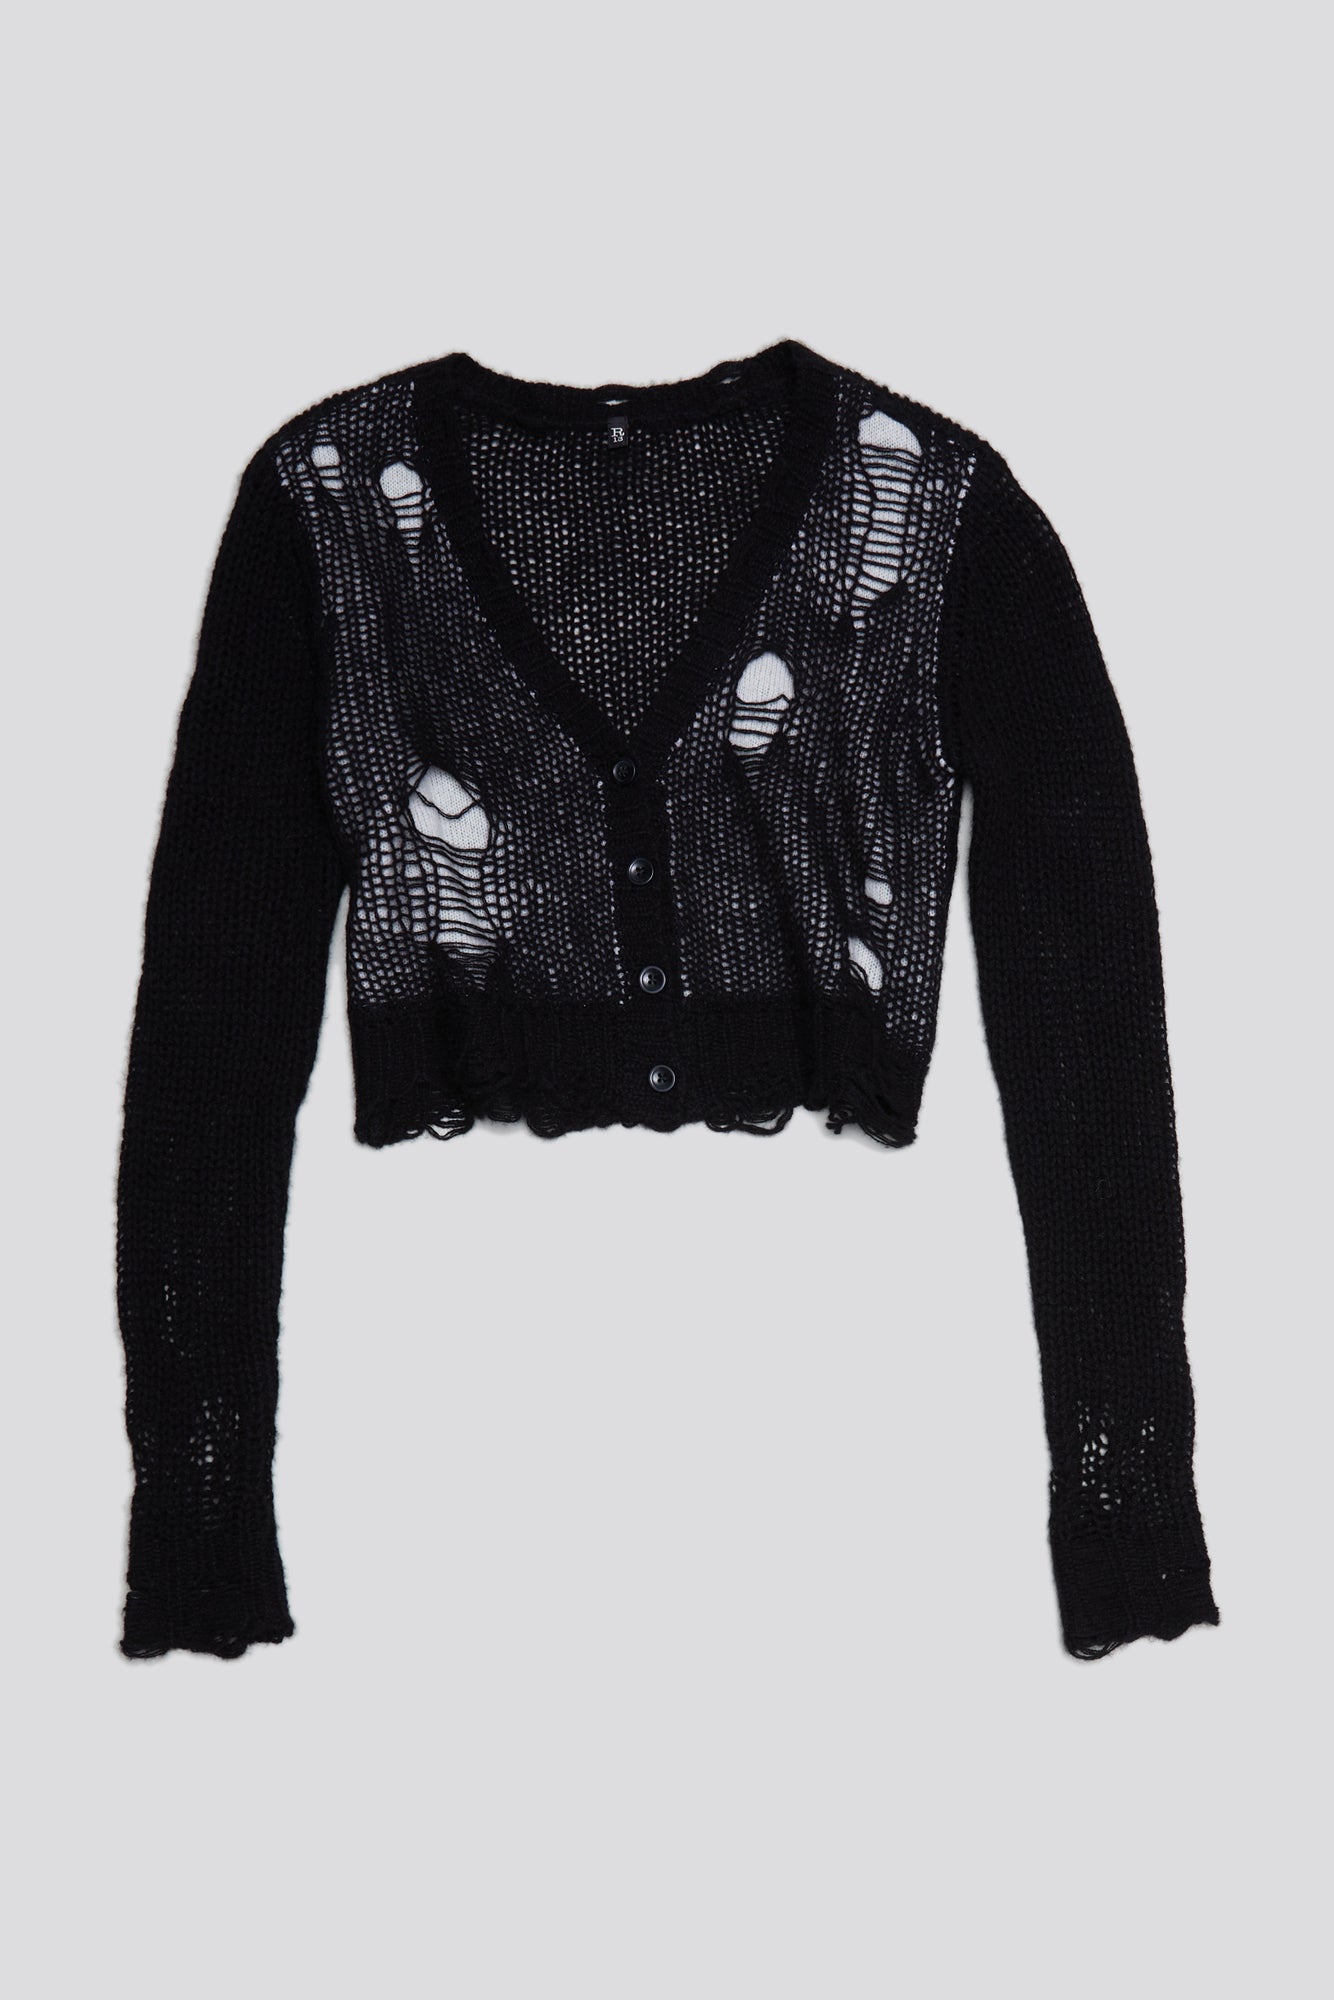 DOUBLE LAYER BABY CARDIGAN - BLACK AND ECRU